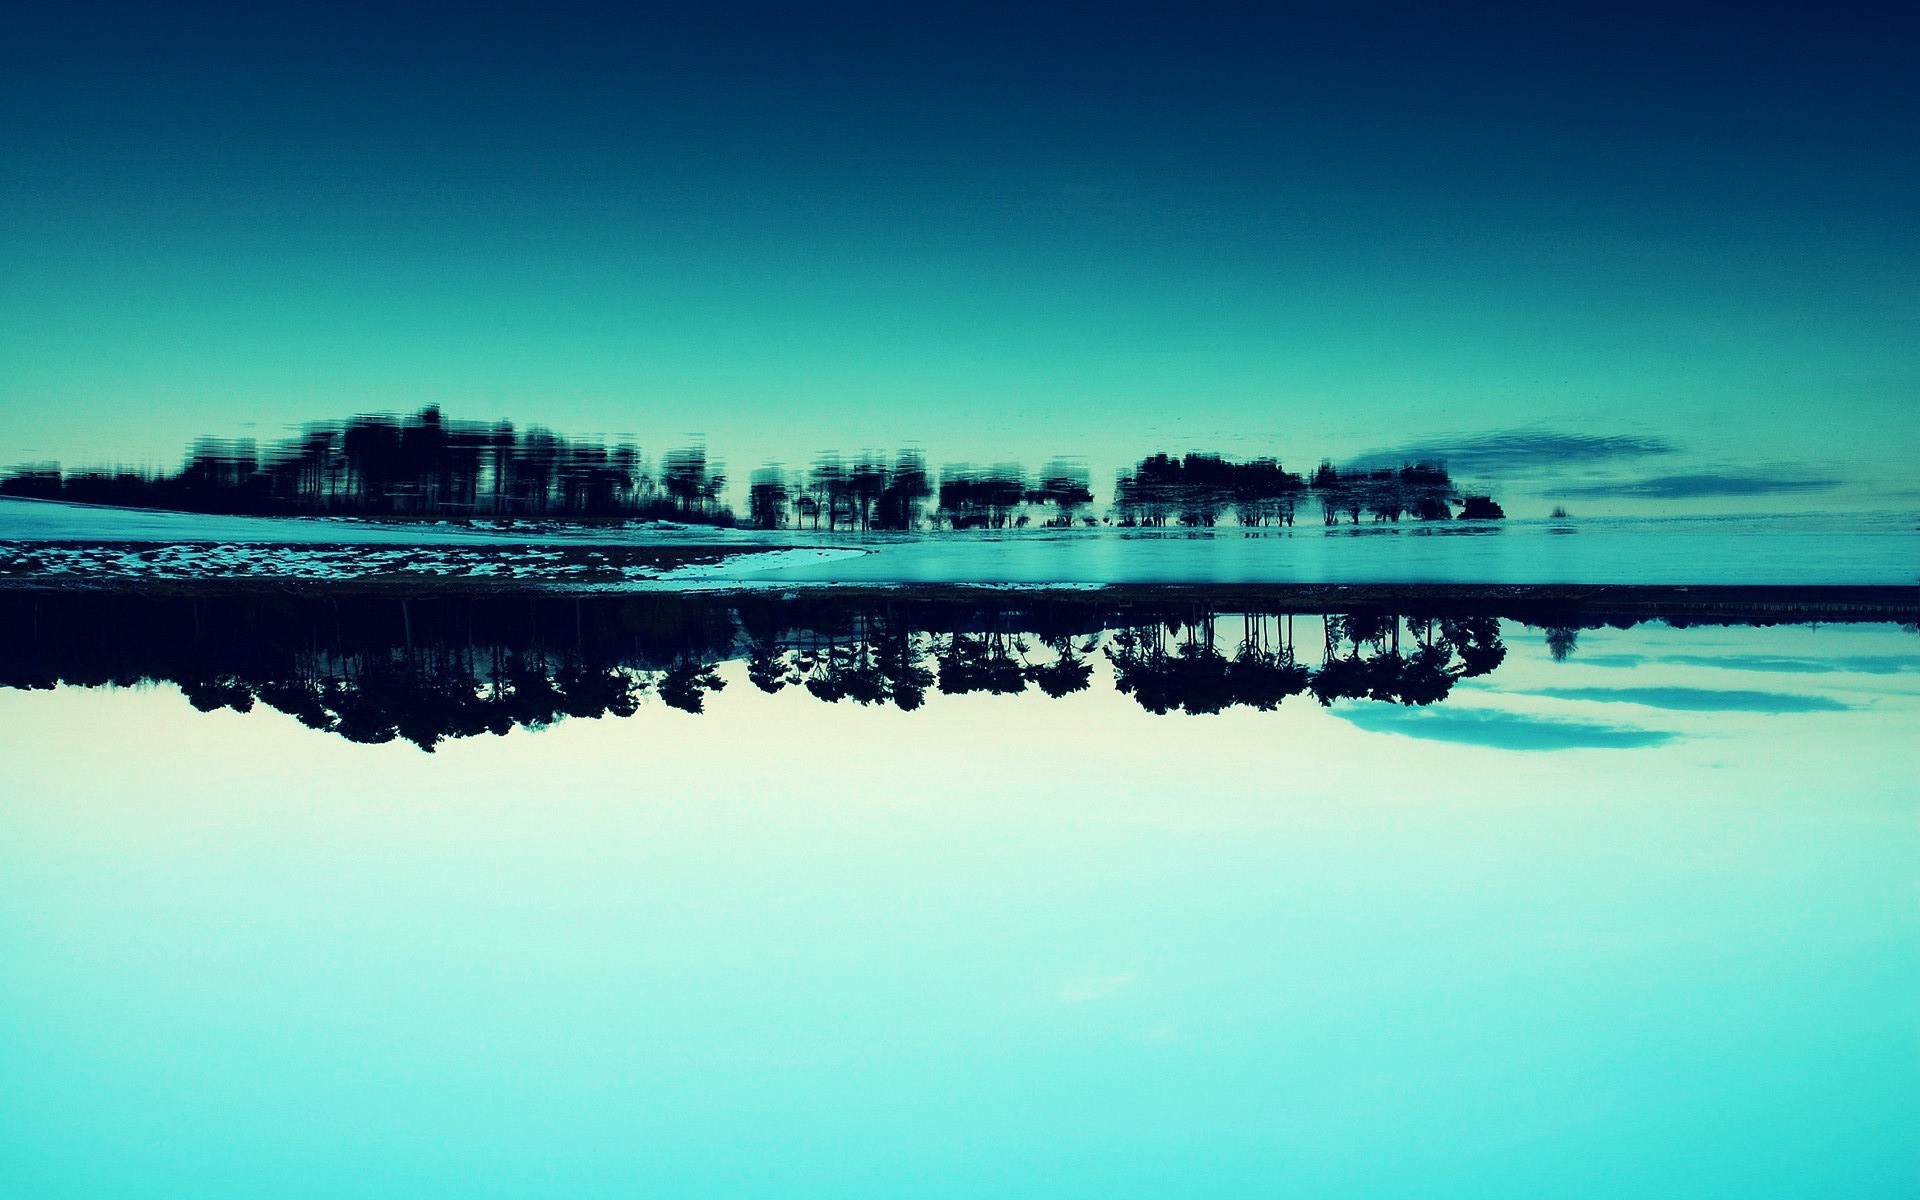 Landscape Nature Reflection Blue Calm Water Trees Sky Inverted Cyan Snow Turquoise 1920x1200